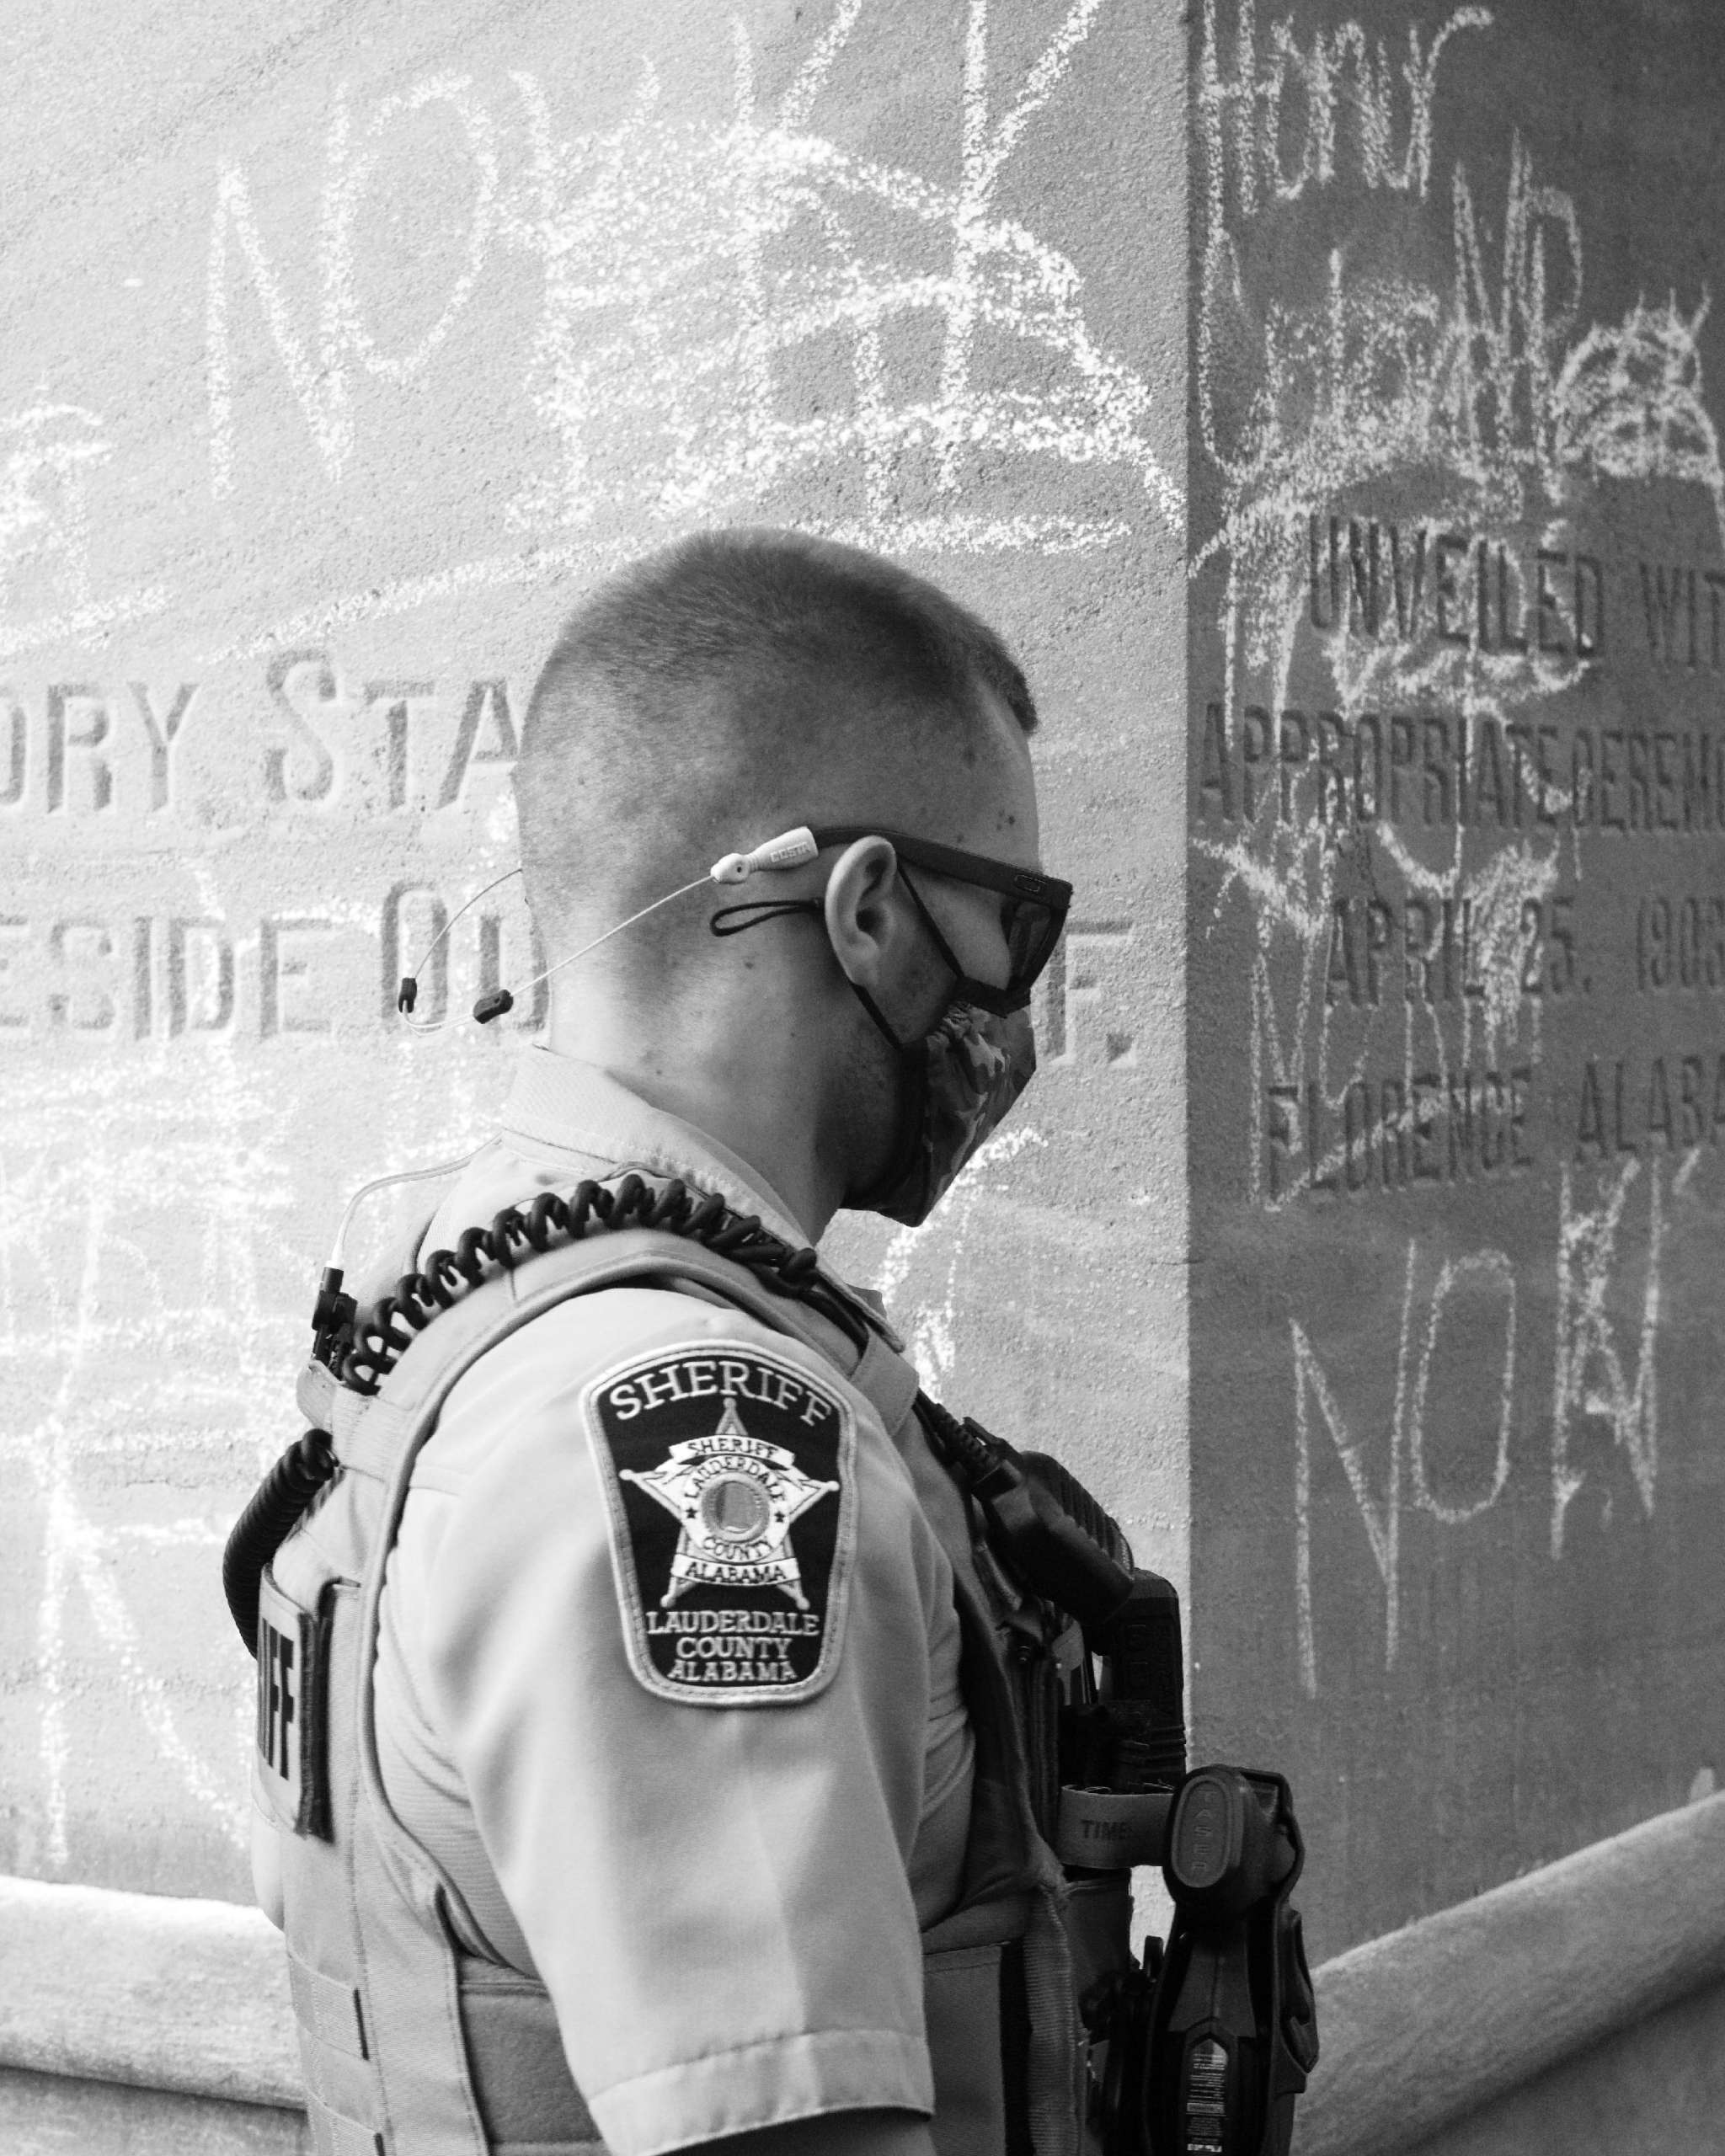 An officer walks past the chalked-up monument on July 27, 2020. No permanent damage was done and chalk was removed.